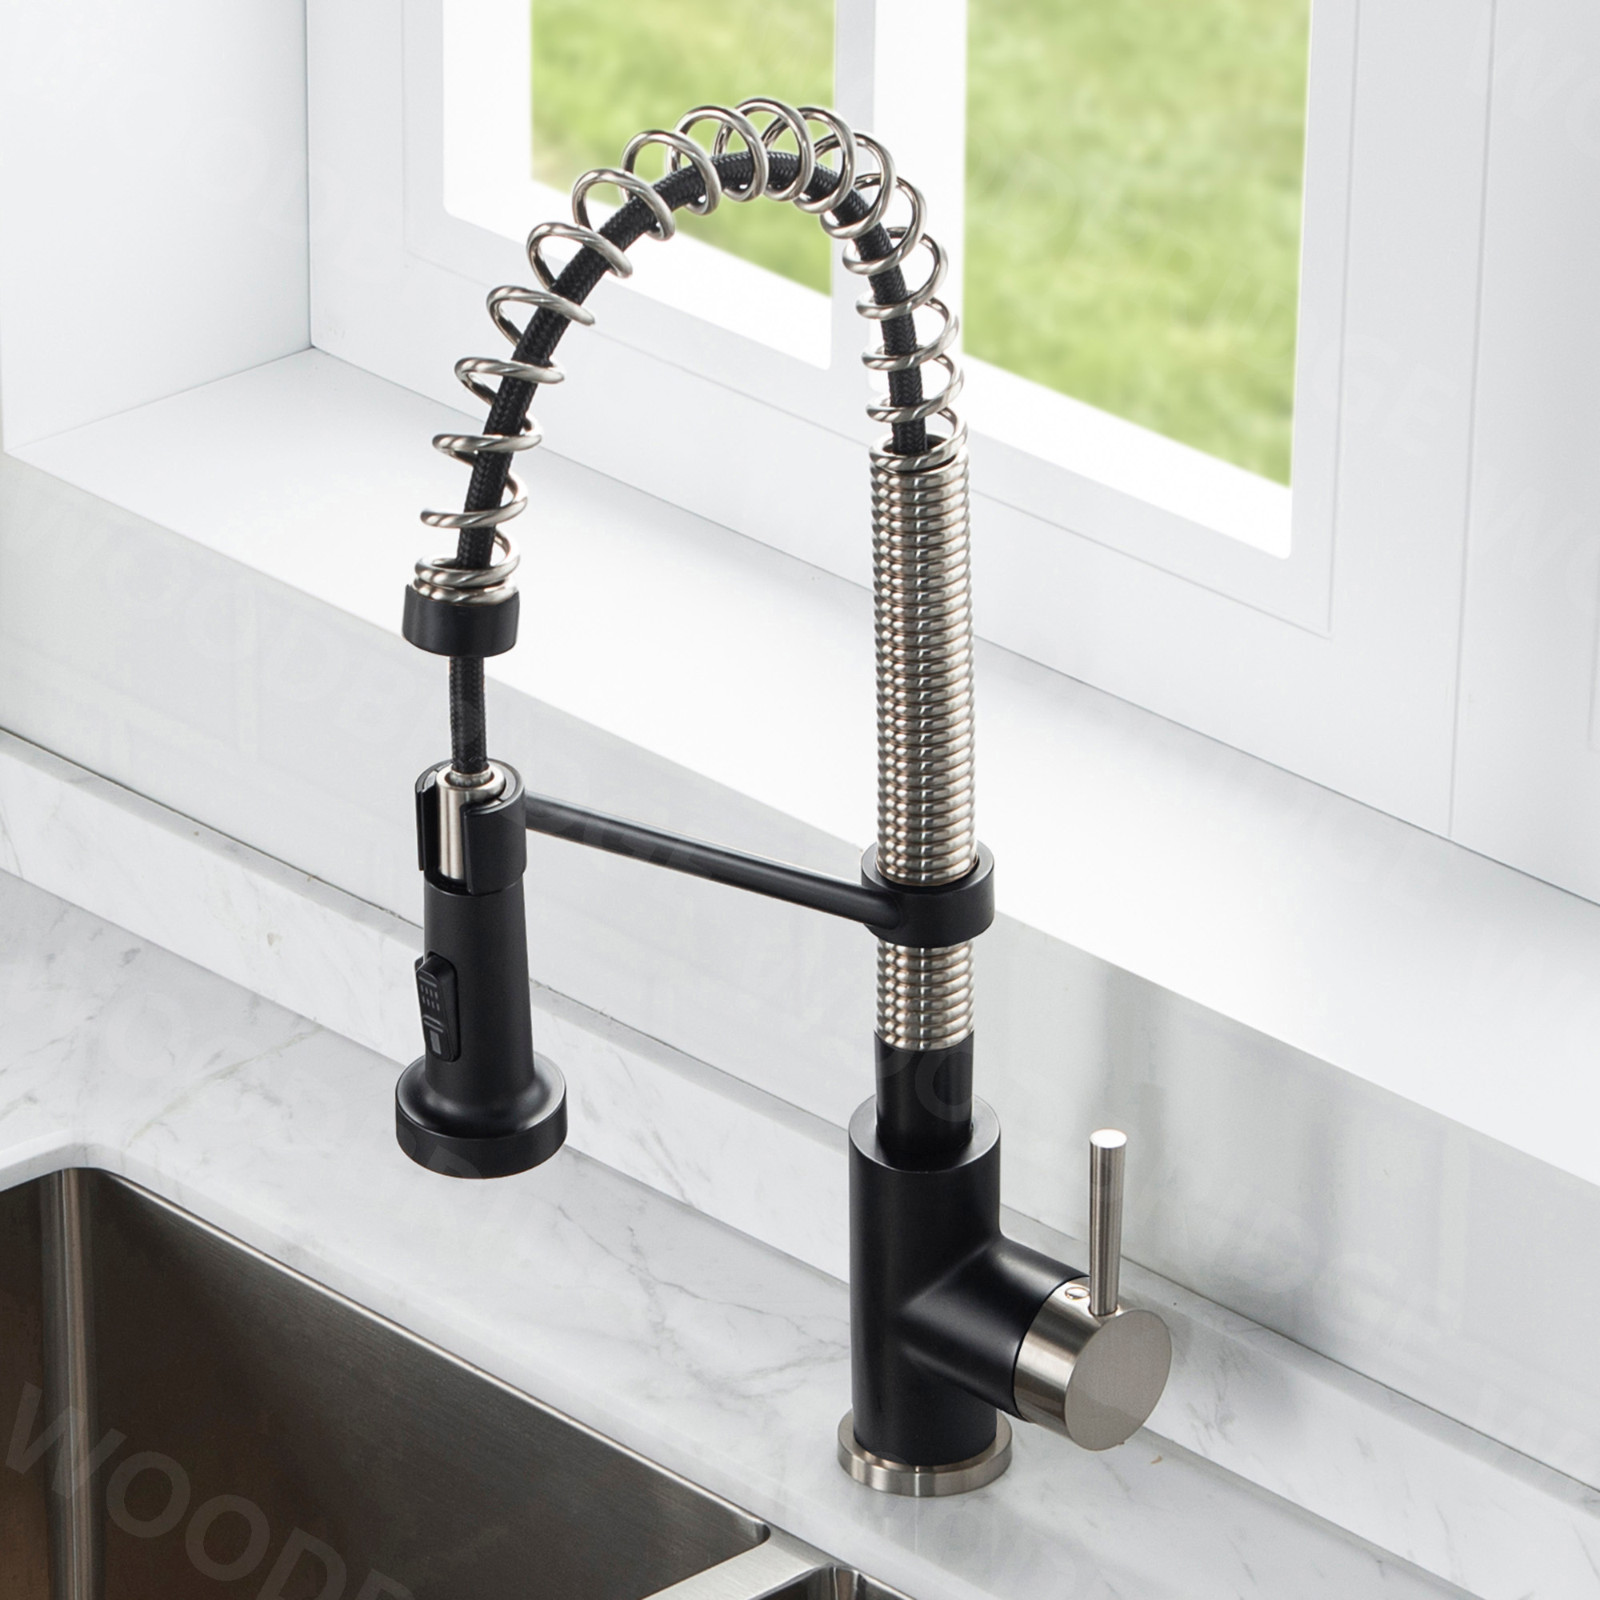  WOODBRIDGE WK010203BL Stainless Steel Single Handle Spring Coil Pre-Rinse Kitchen Faucet with Pull Down Sprayer, Matte Black Finish_9463